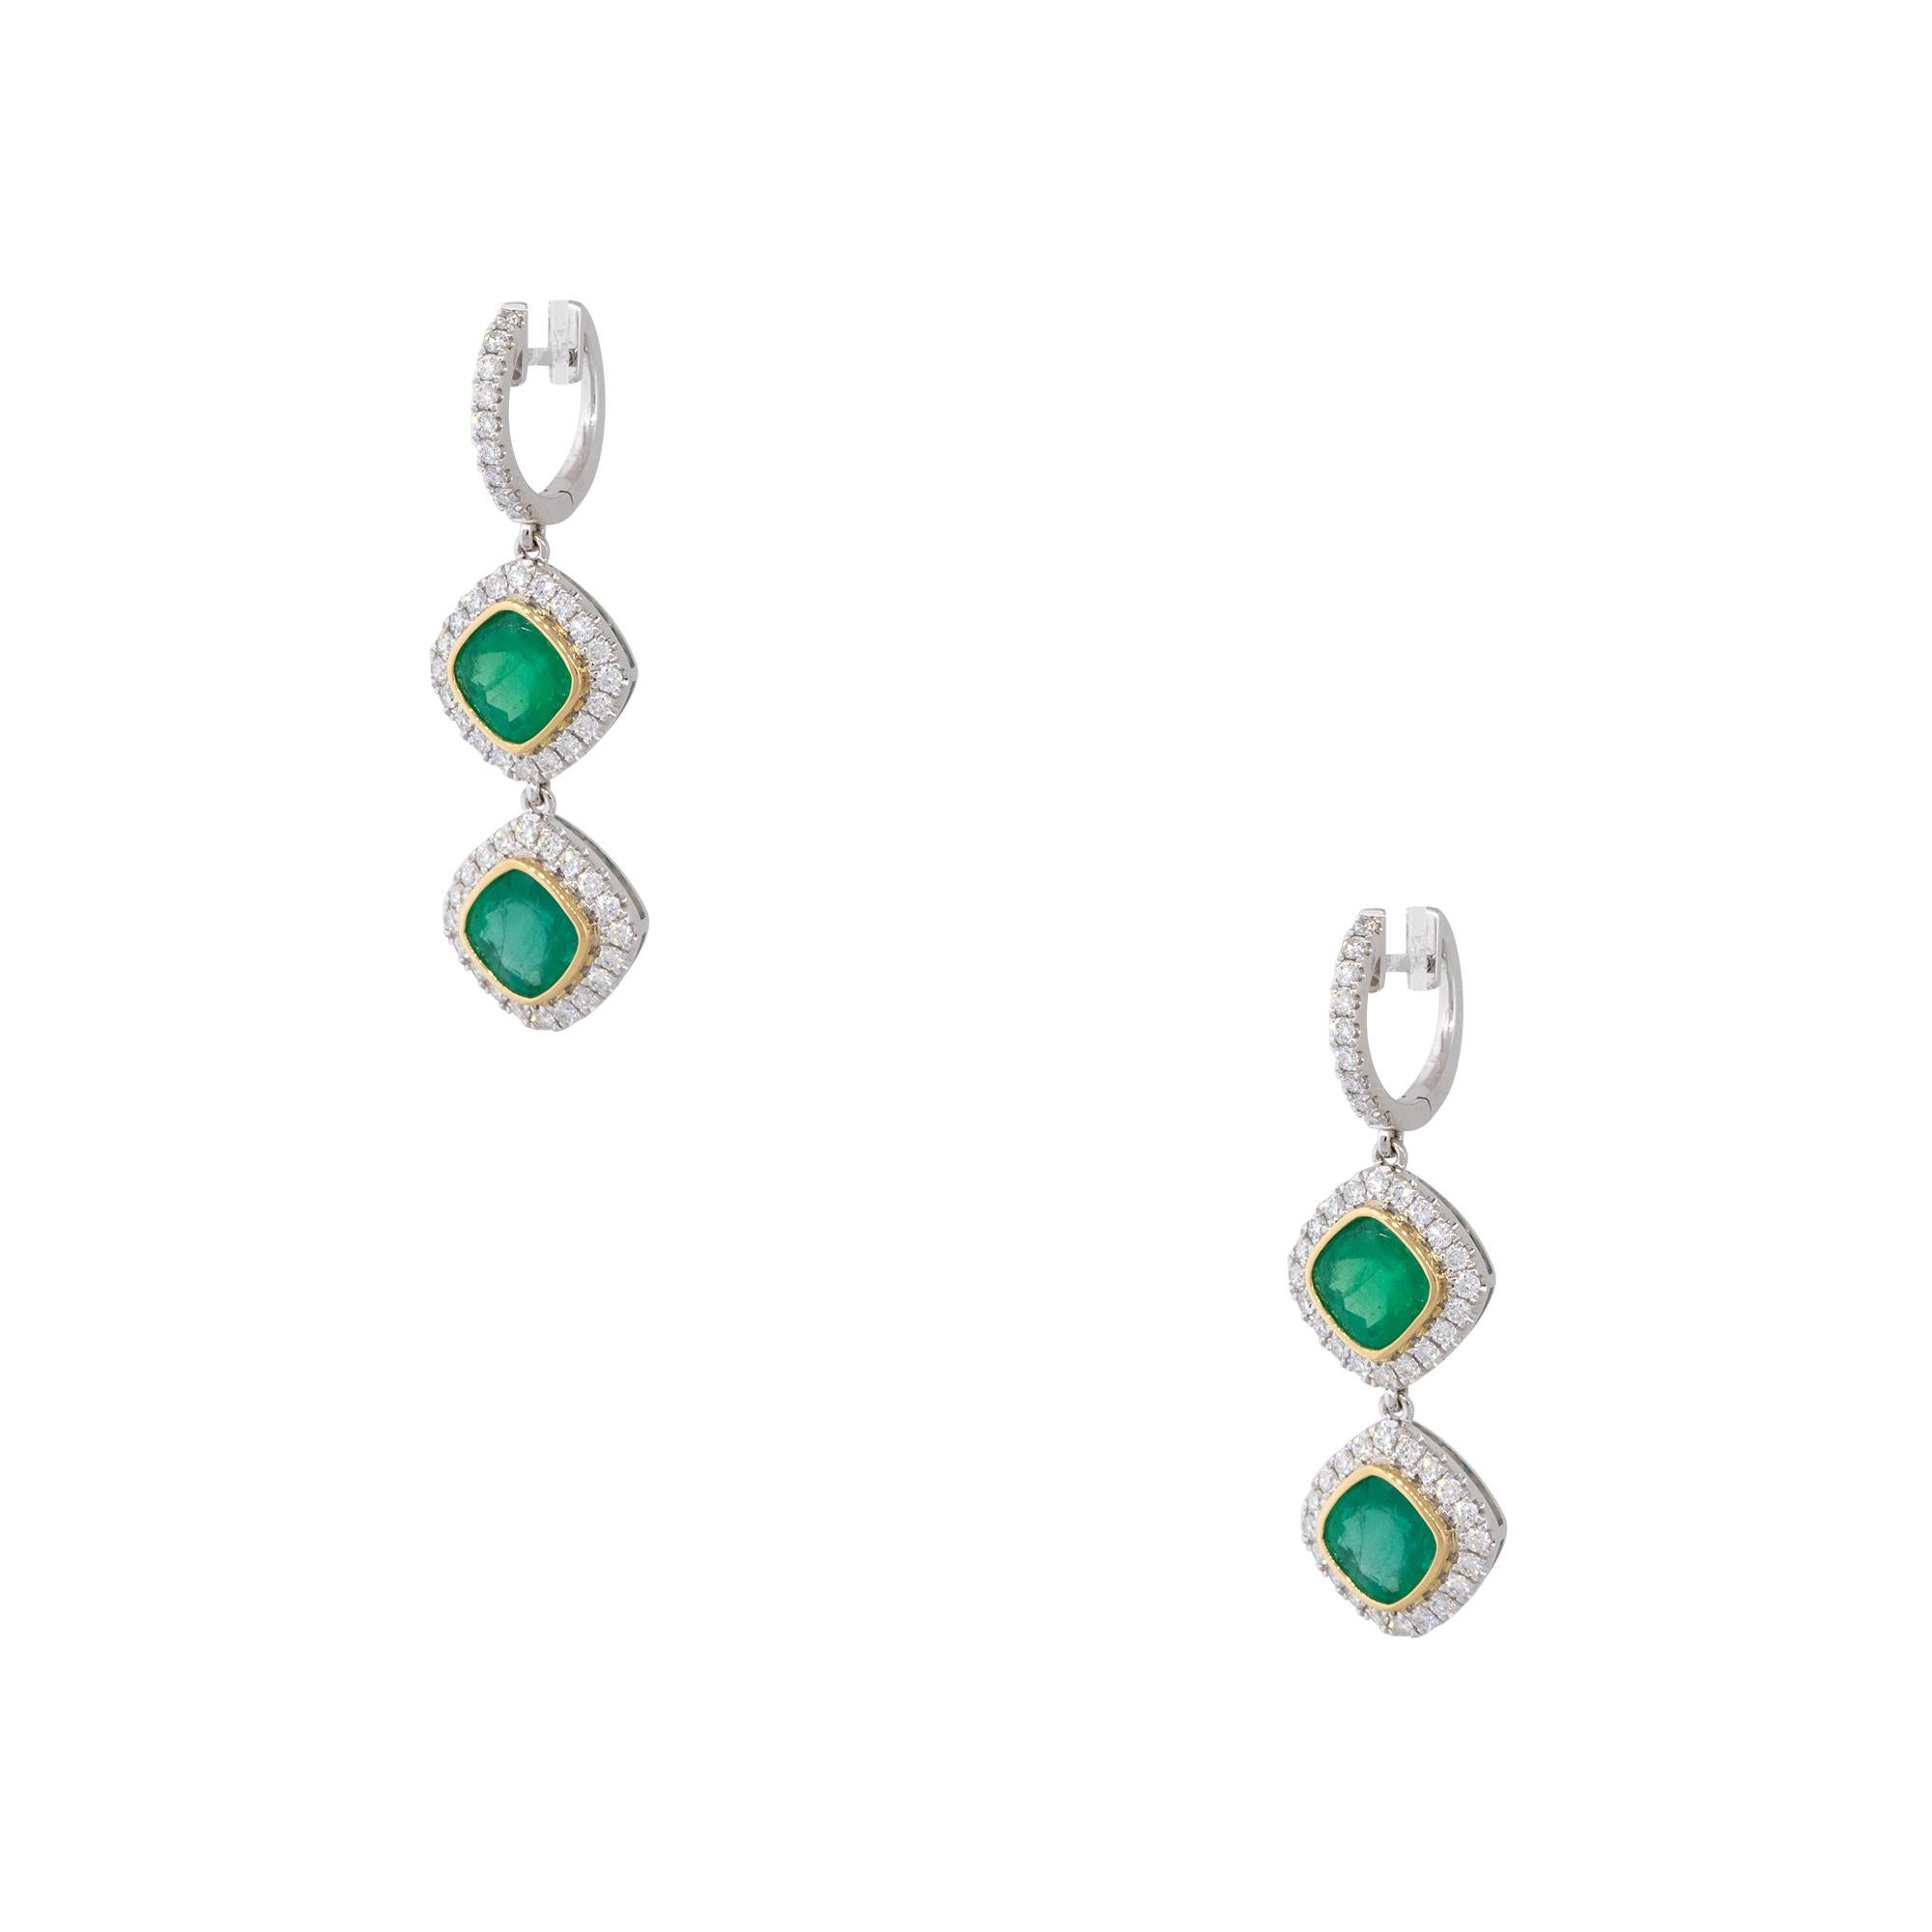 18k White and Yellow Gold 4.86ctw Emerald and Diamond Drop Earrings

Material: 18k White Gold and 18k Yellow Gold
Gemstone Details: Approximately 4.86ctw of Emeralds. There are 4 Emeralds total
Diamond Details: Approximately 1.20ctw of Round